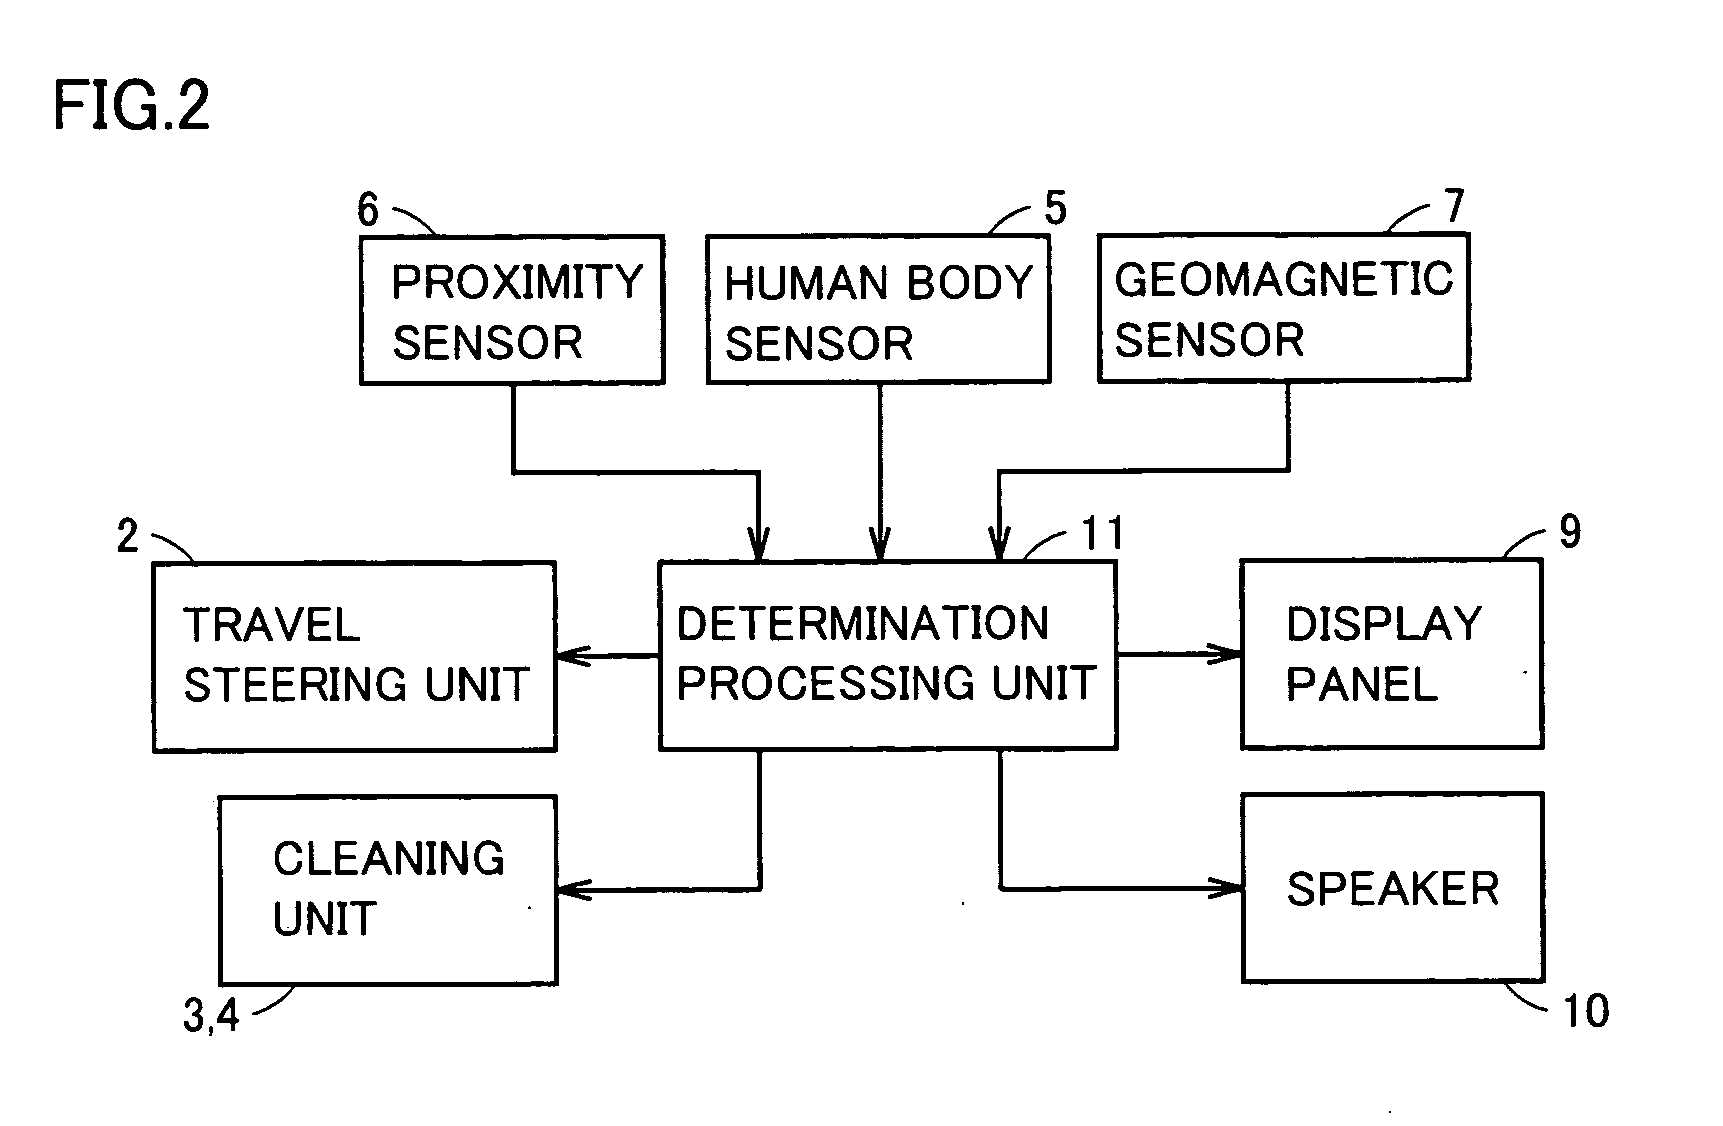 Self-running cleaner with collision obviation capability